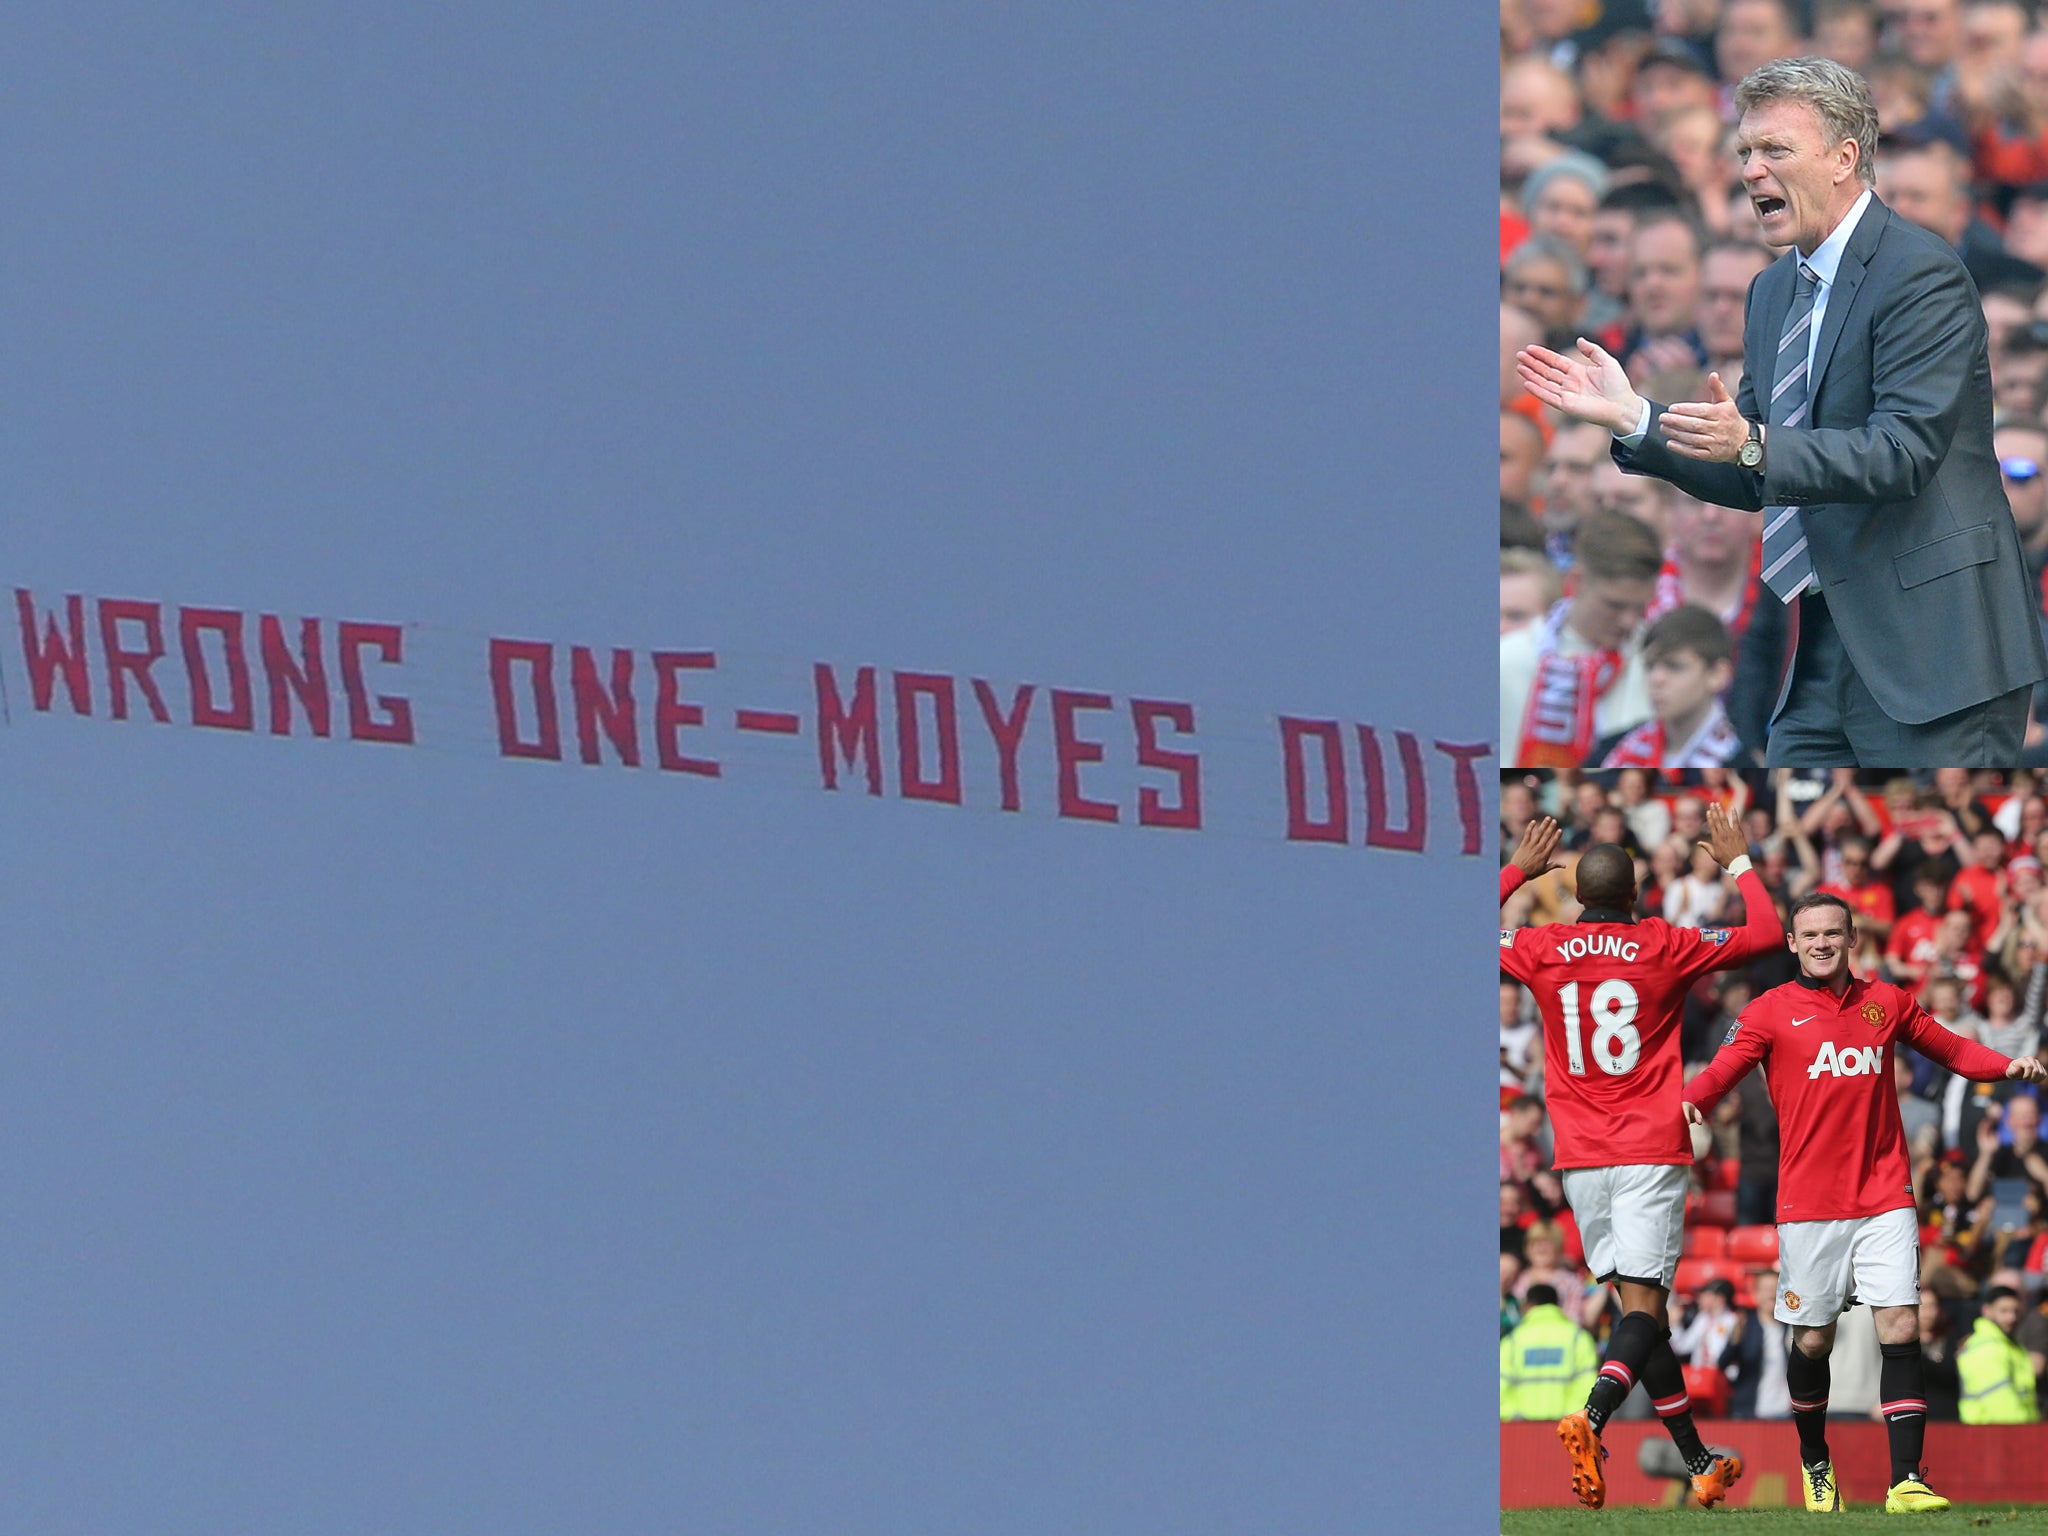 A plane flies over Old Trafford calling for David Moyes to be sacked